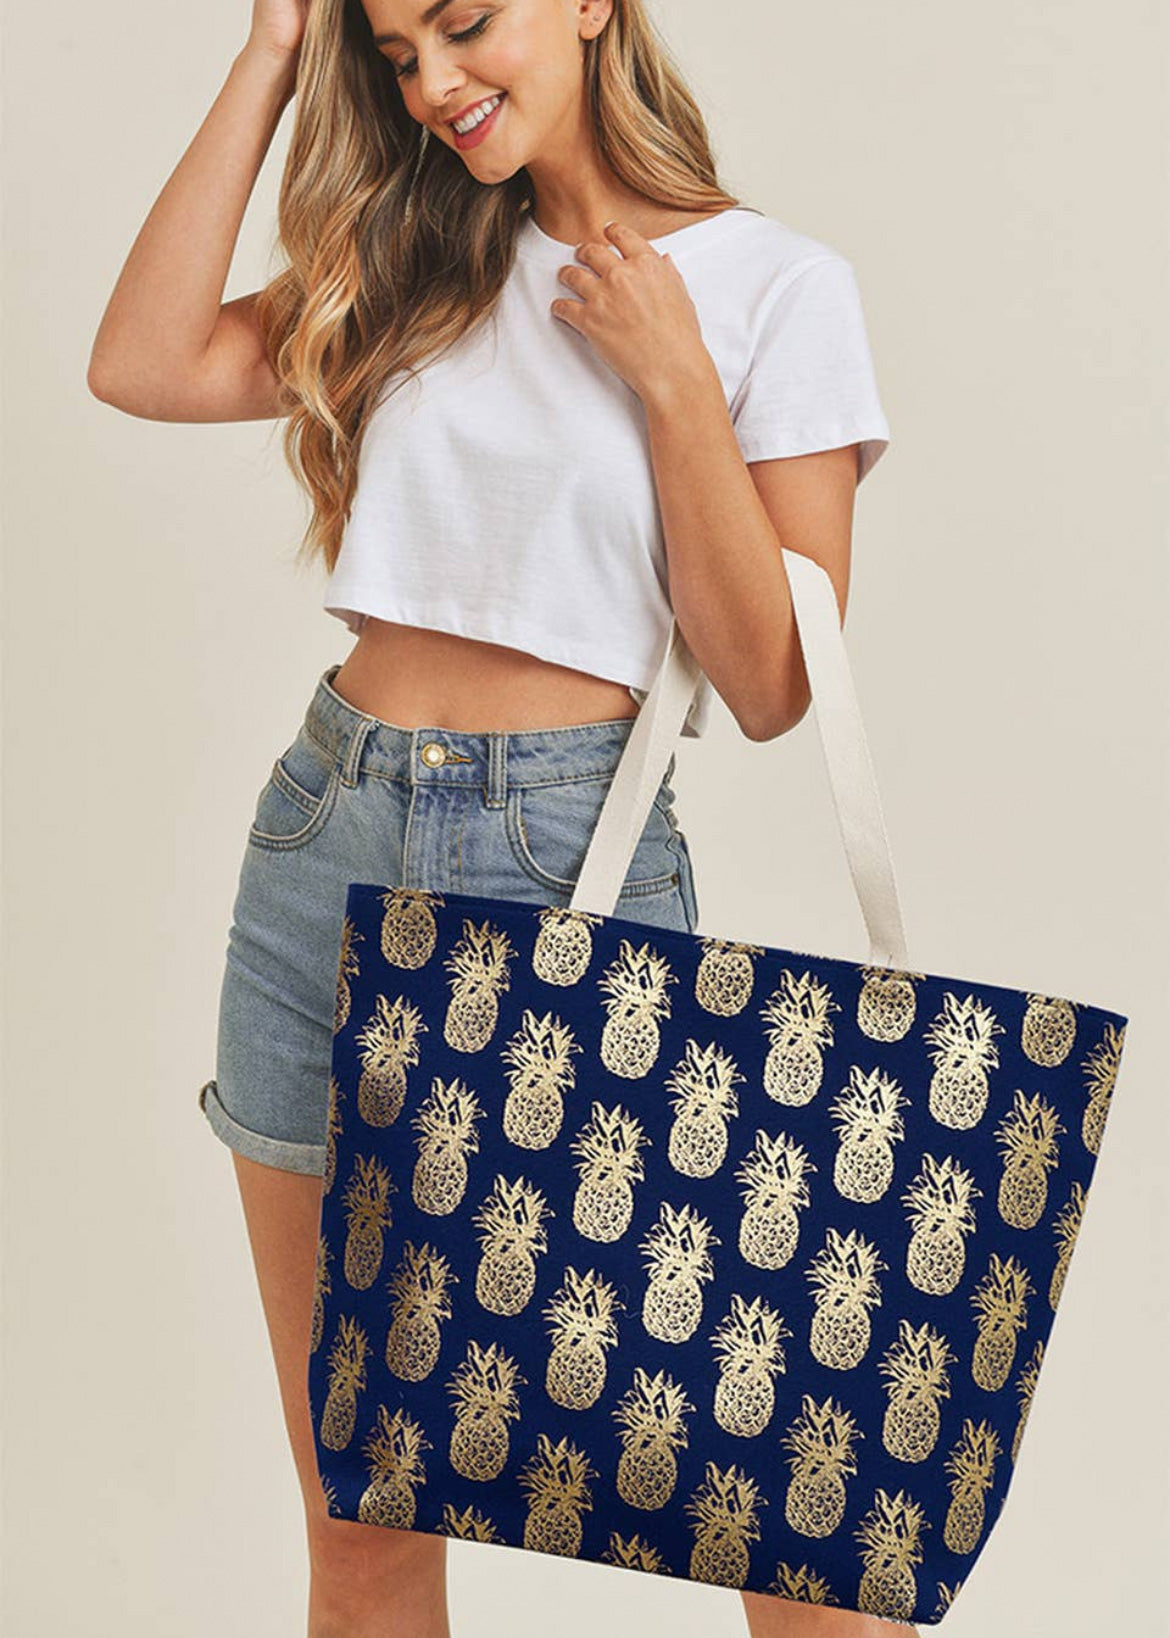 Navy beach bag with gold foil pineapples imprinted  throughout.  Bag has a snap closure and long straps. 